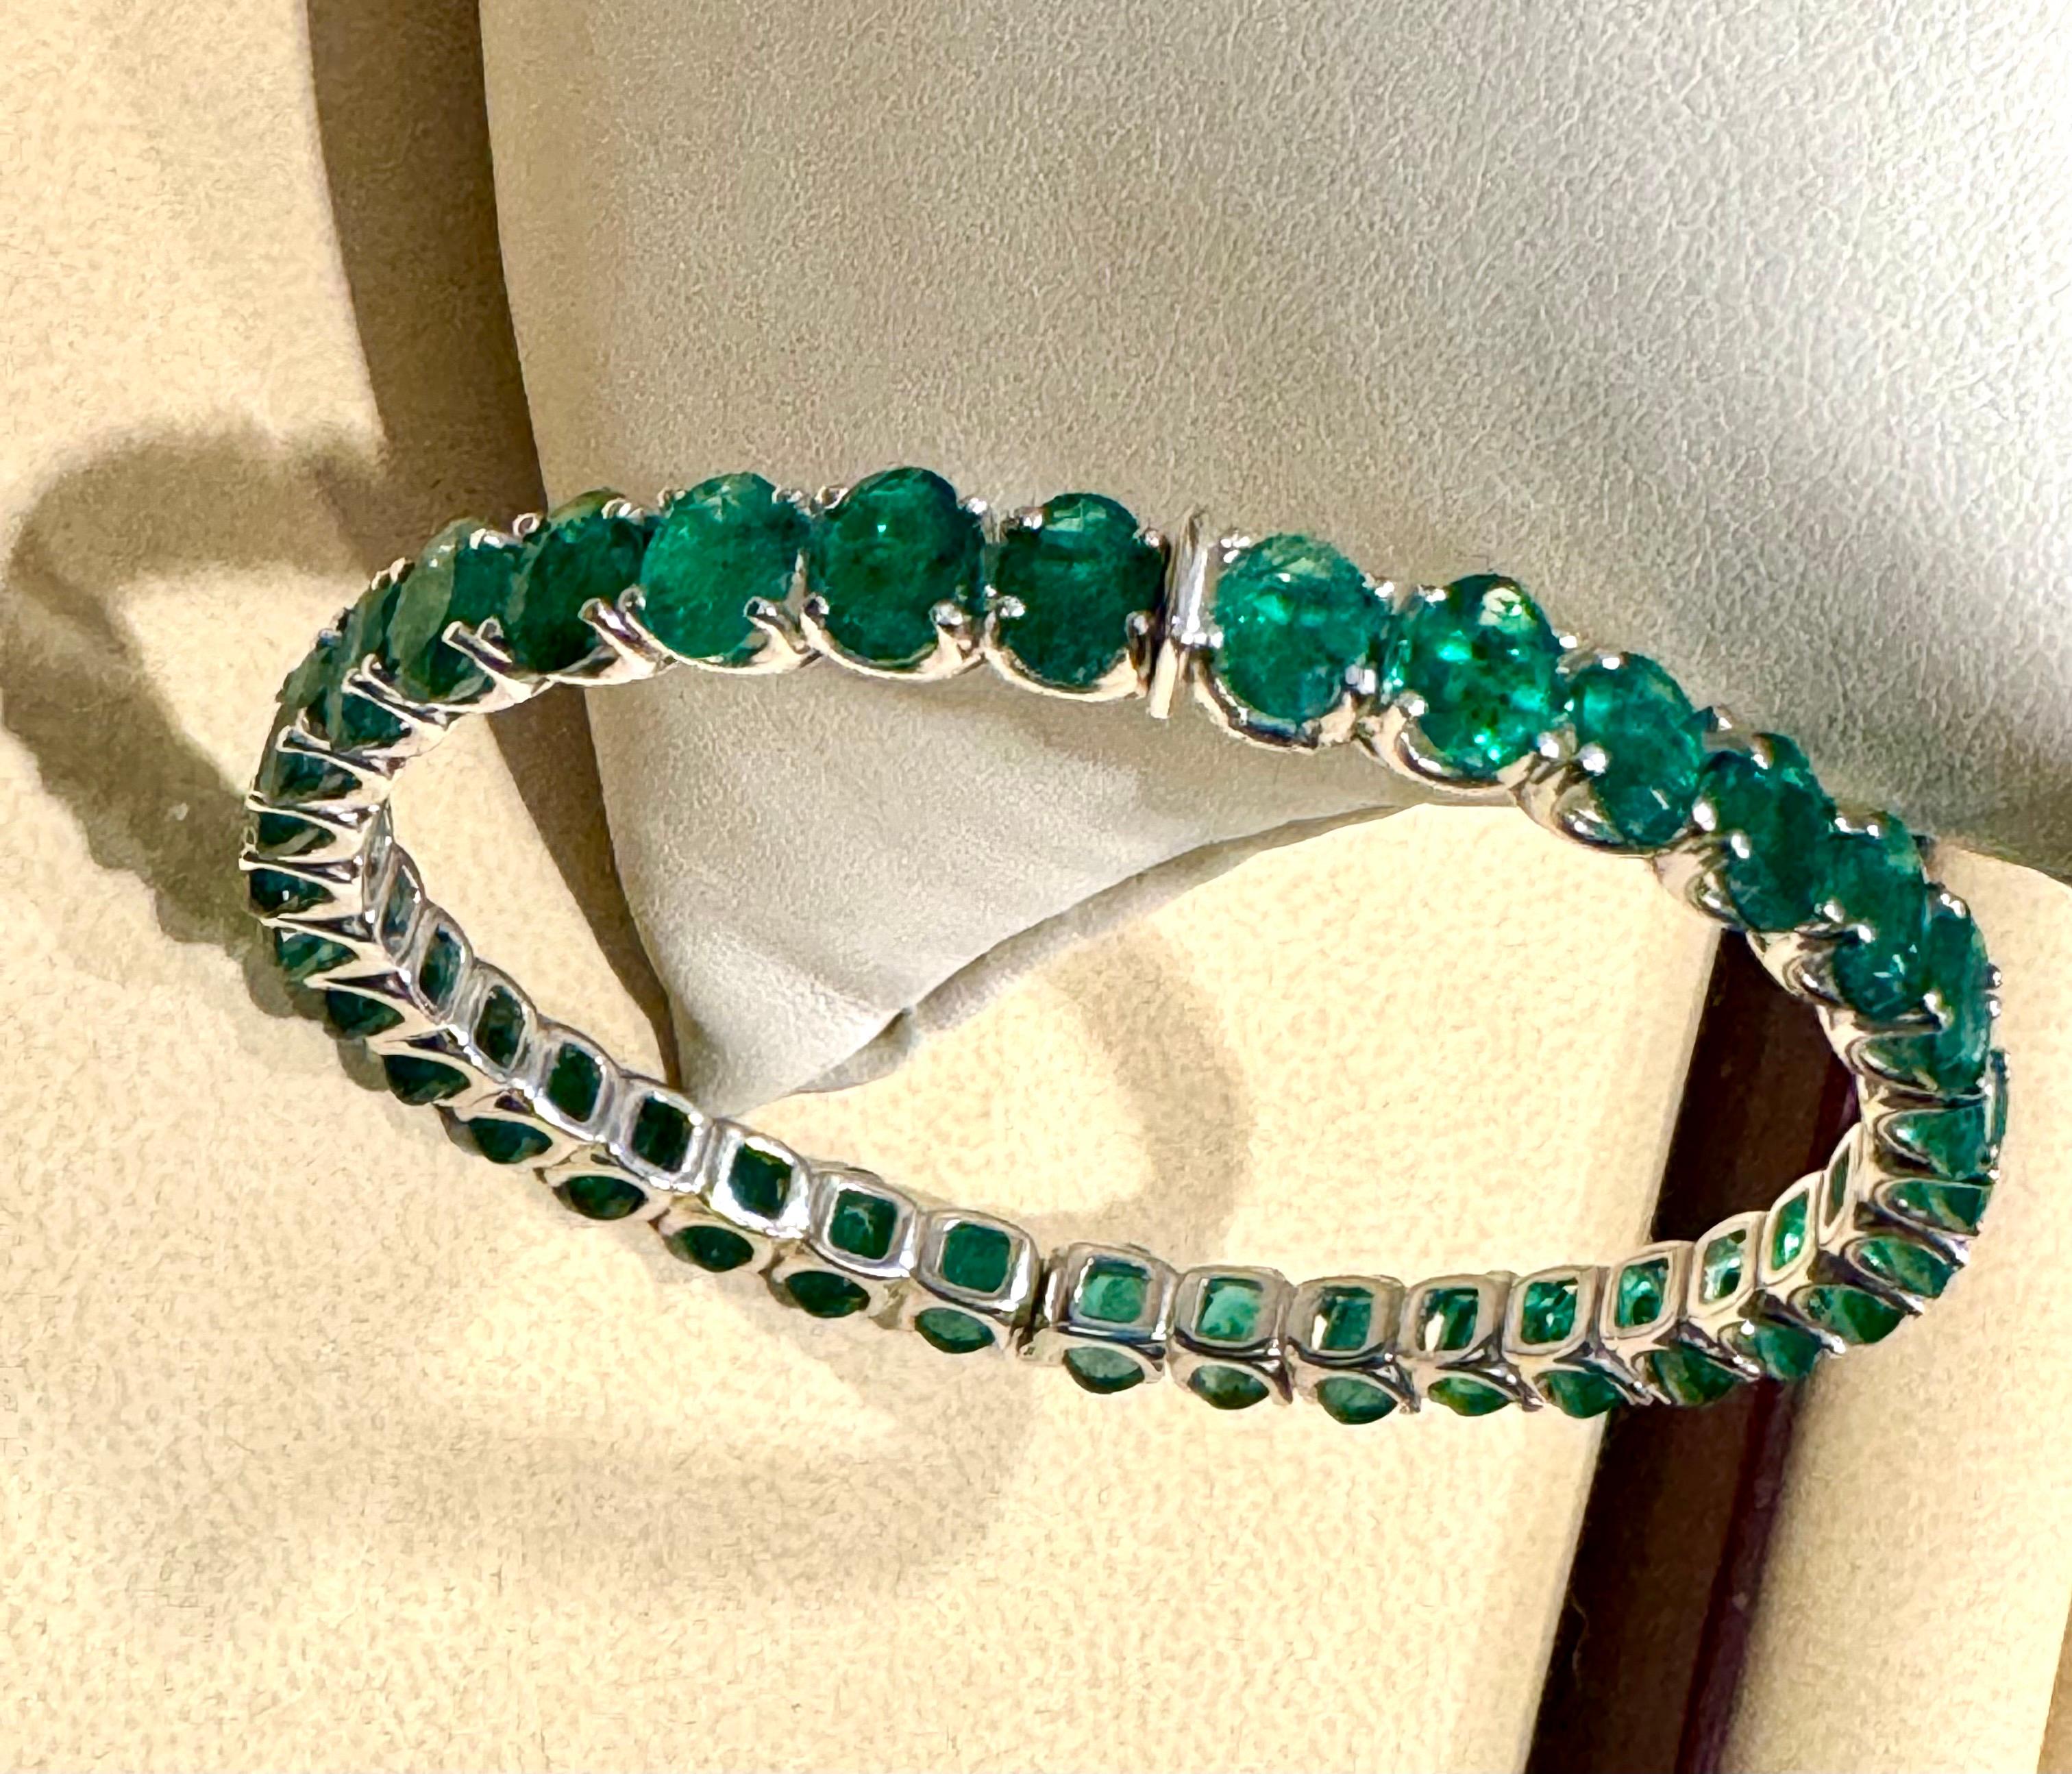 Designer Roberto coin 25 Carat Natural Emerald 18 Karat White Gold Bangle In Excellent Condition For Sale In New York, NY